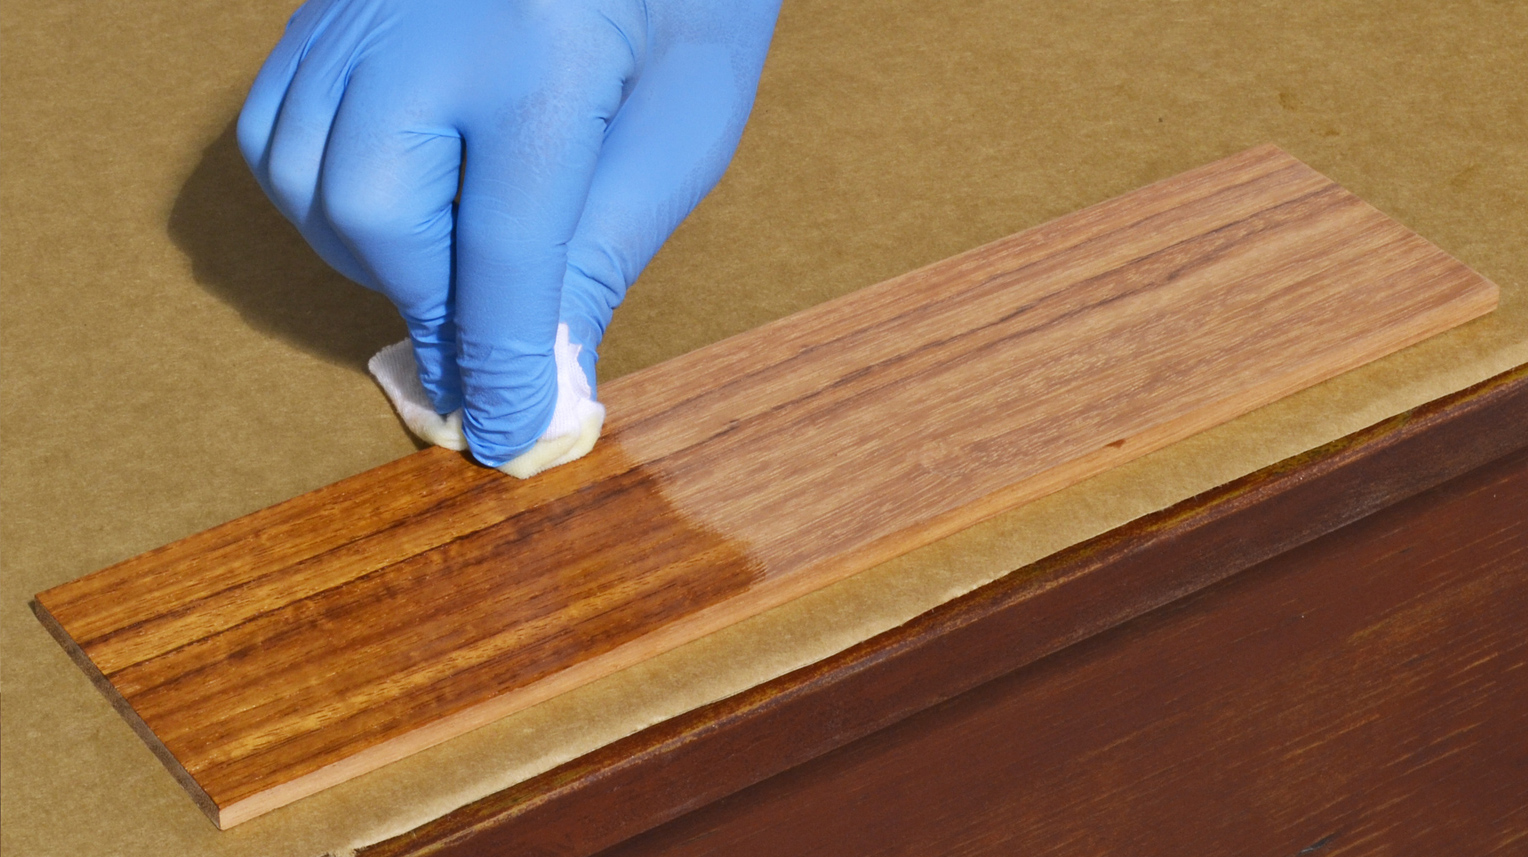 Linseed oil, a natural solution for Wood Finishing - Ardec